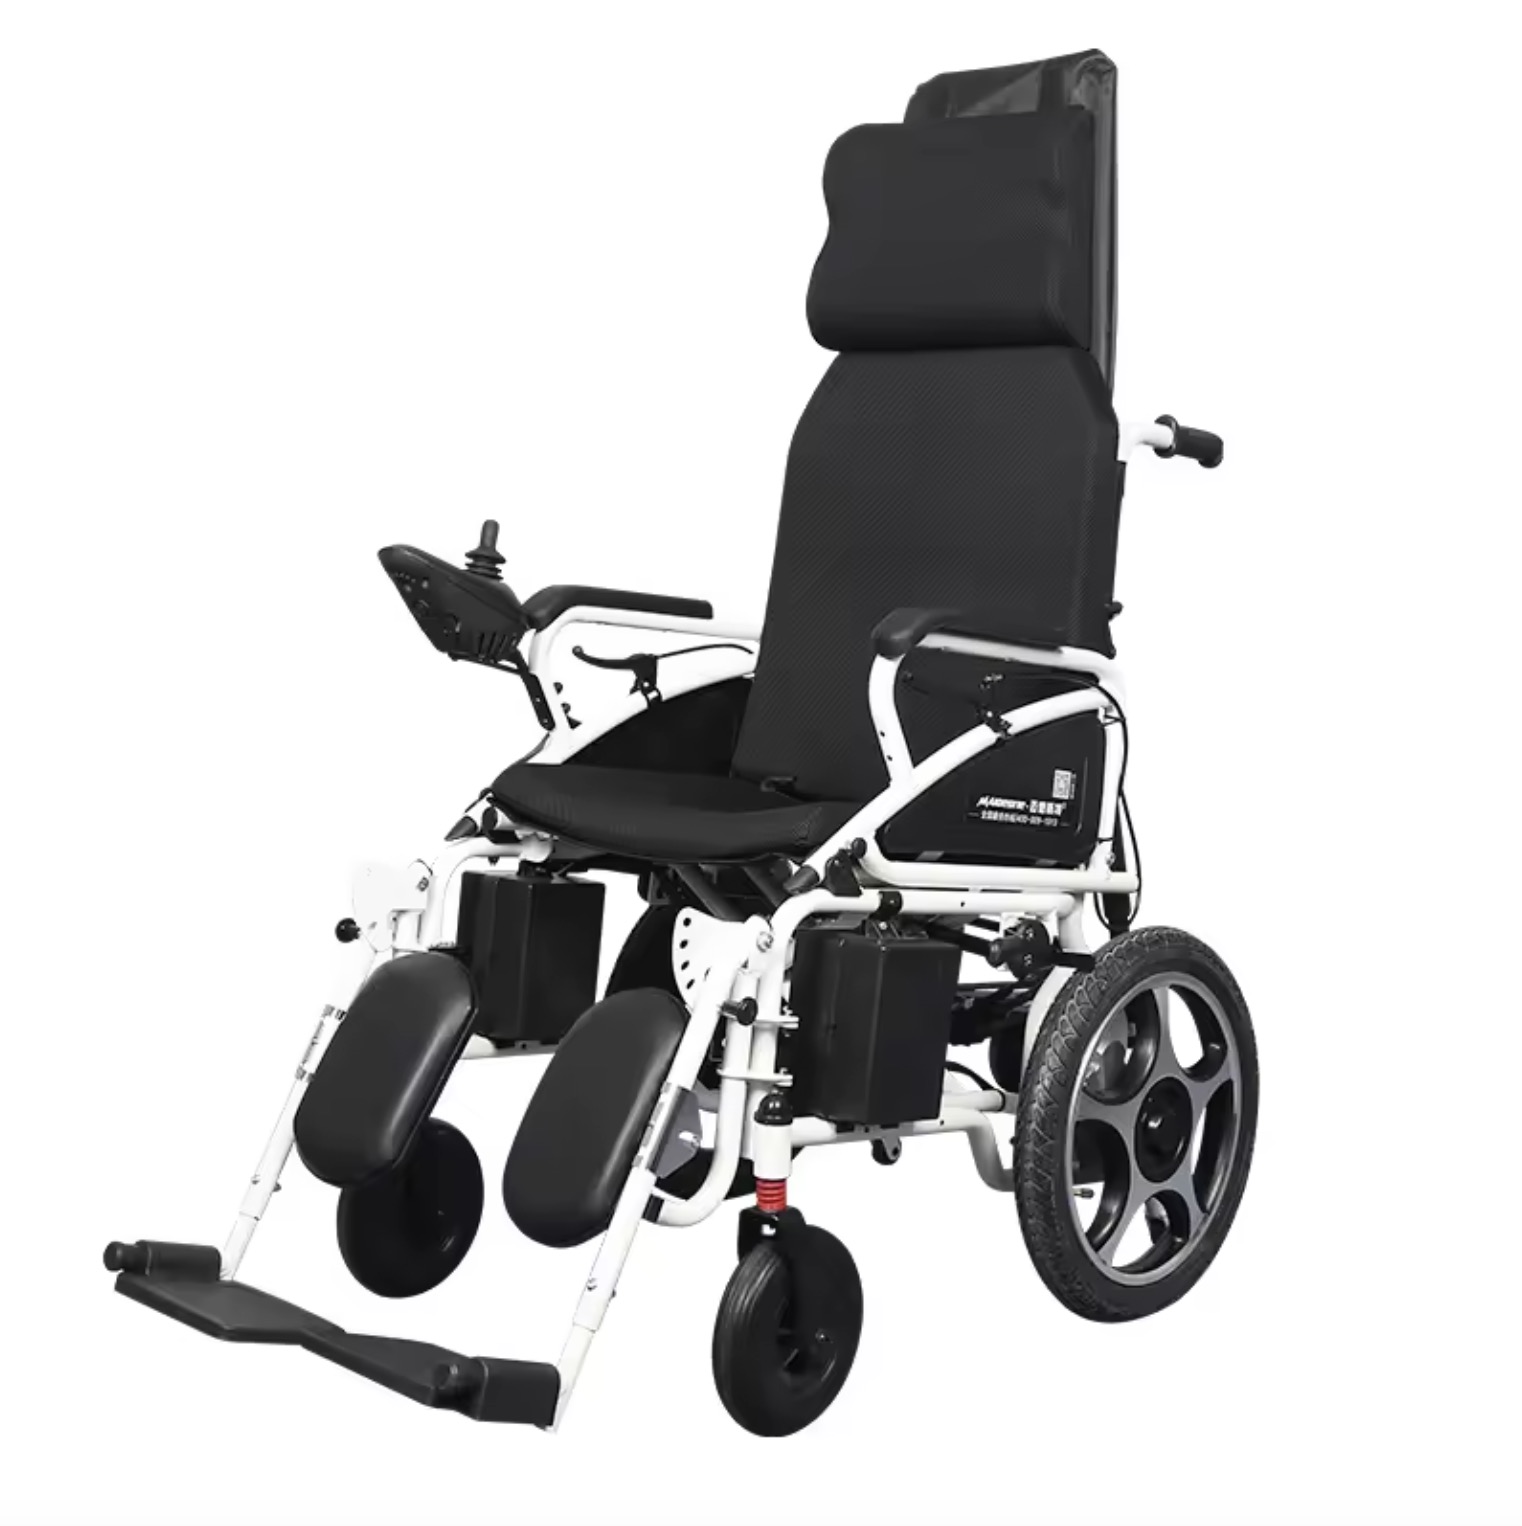 Maidesite DLY-801 Reclining High Back Electrical Wheelchair with Adjustable Armrest and Legrest